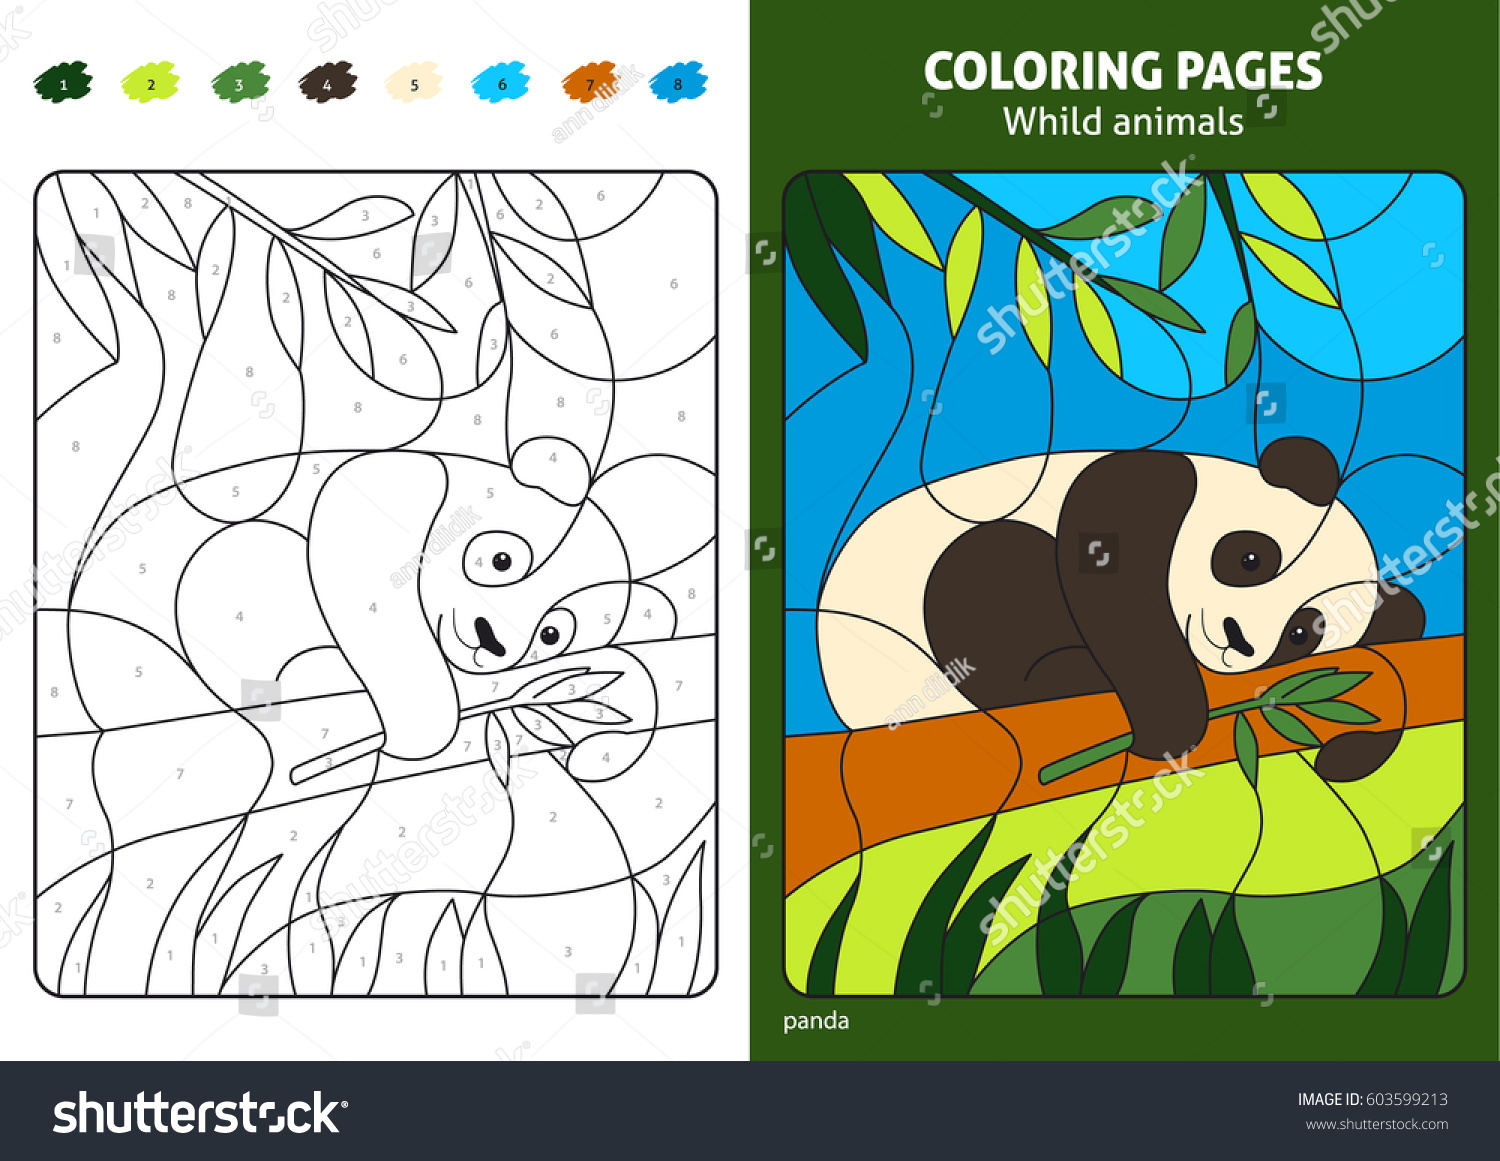 Download Wild Animals Coloring Page Kids Panda Stock Vector Royalty Free 603599213